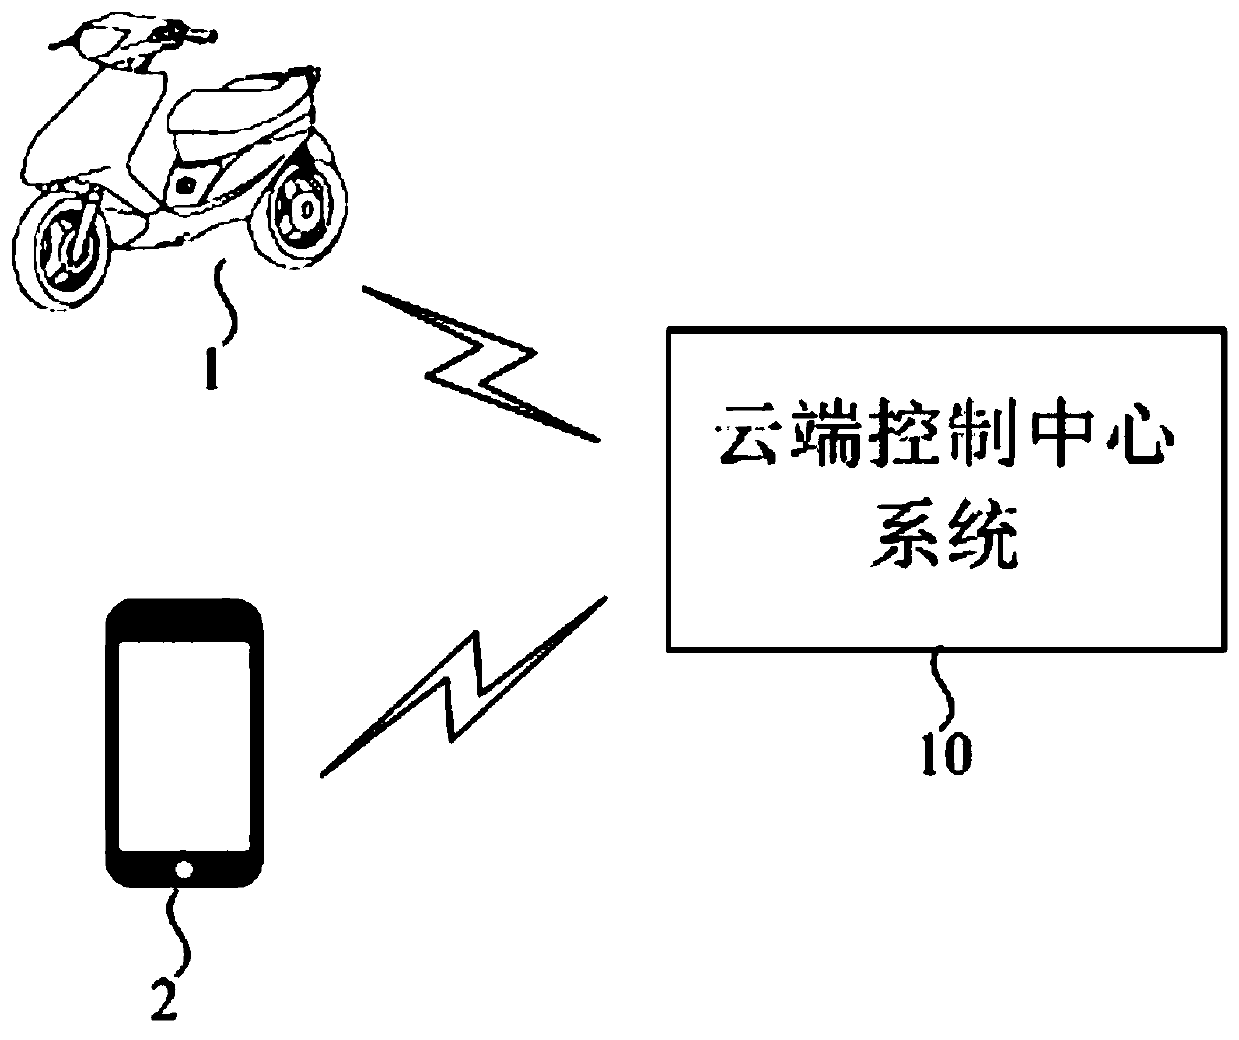 Electric motorcycle alarm method and system